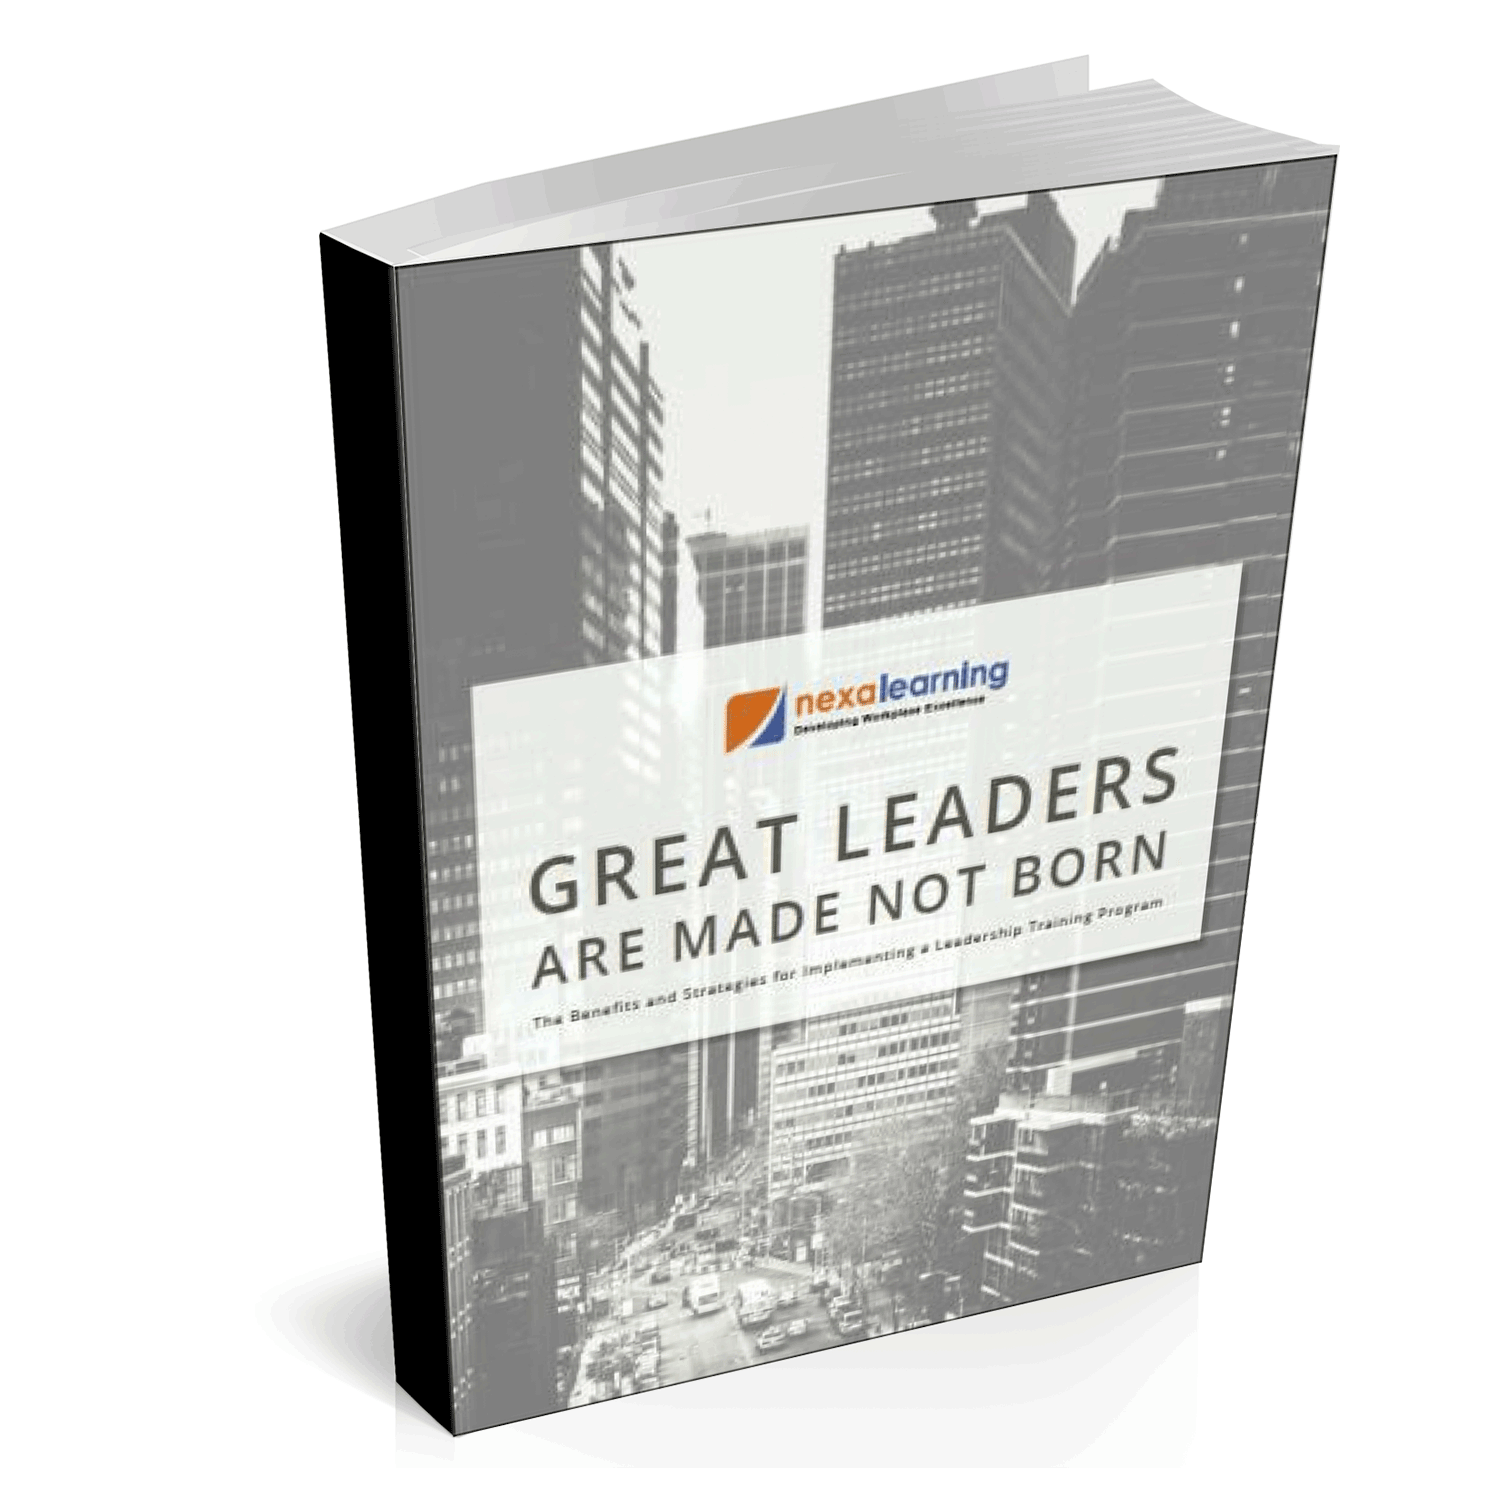 Great Leaders are Made Not Born